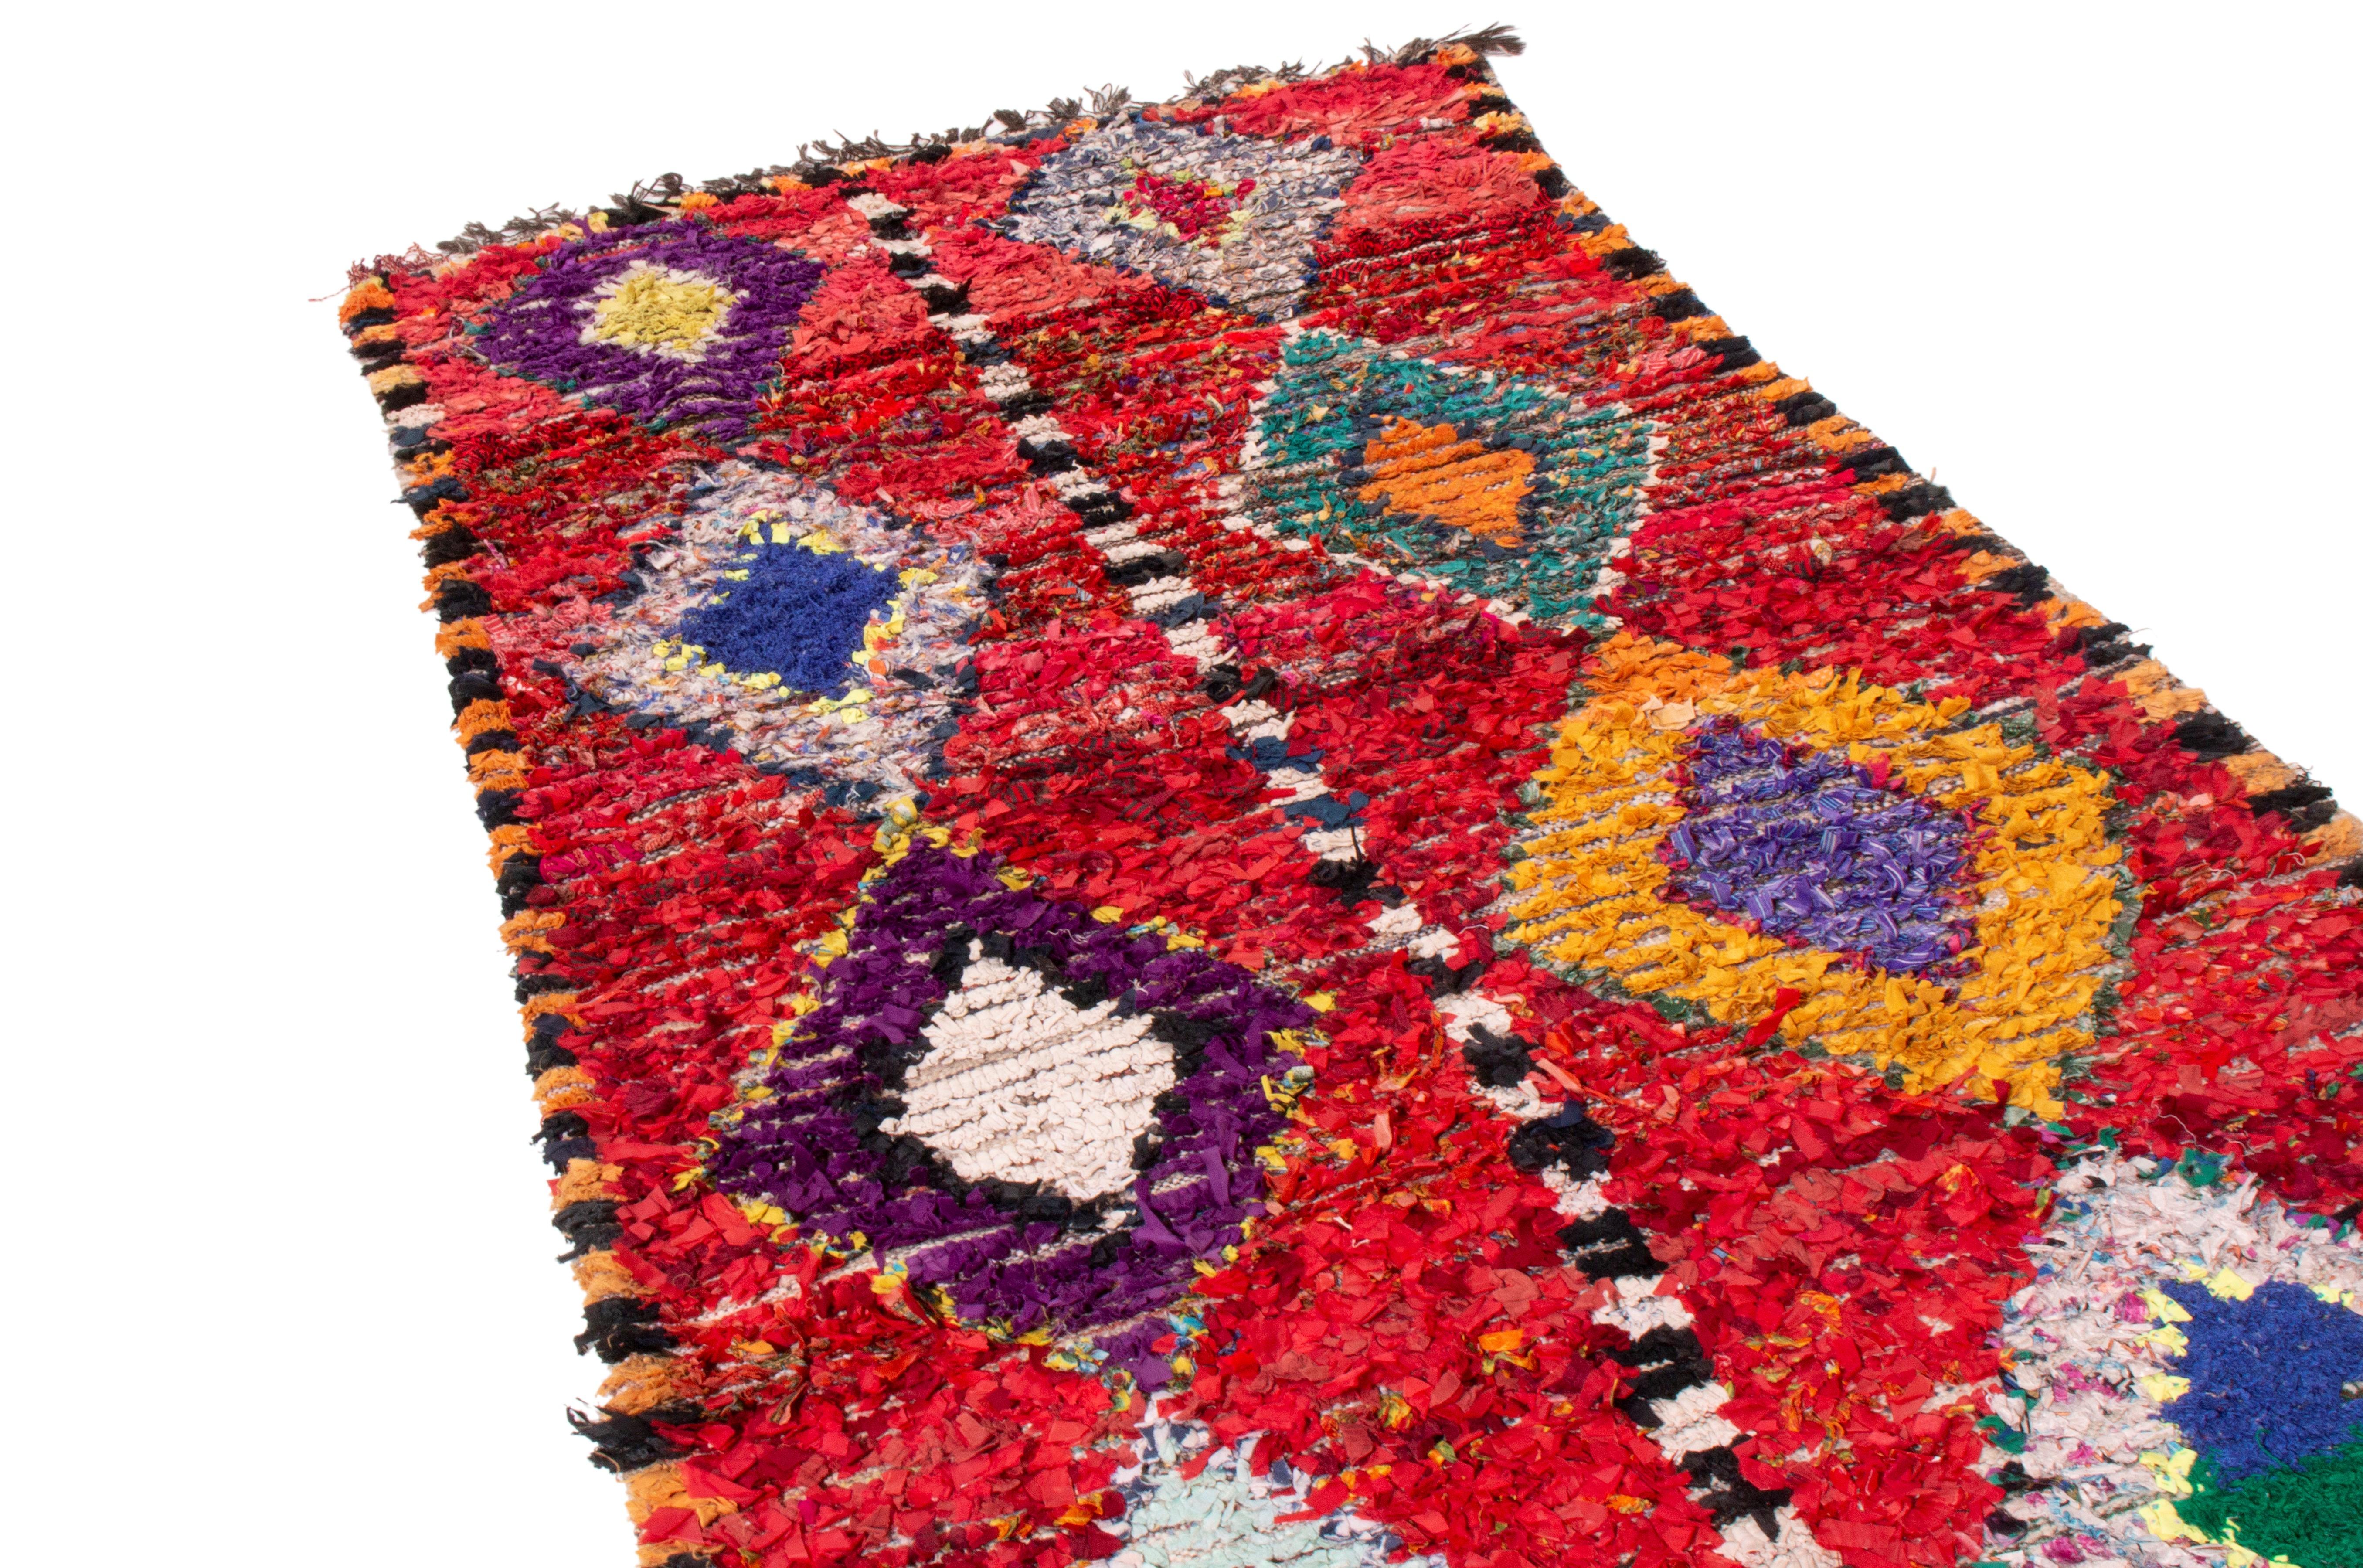 Originating from Morocco in 1950, this vintage mid-century transitional Moroccan rug employs a distinct geometric orientation to its culturally significant symbolism. Hand knotted in high quality wool pile, the textural, plush blood red field with